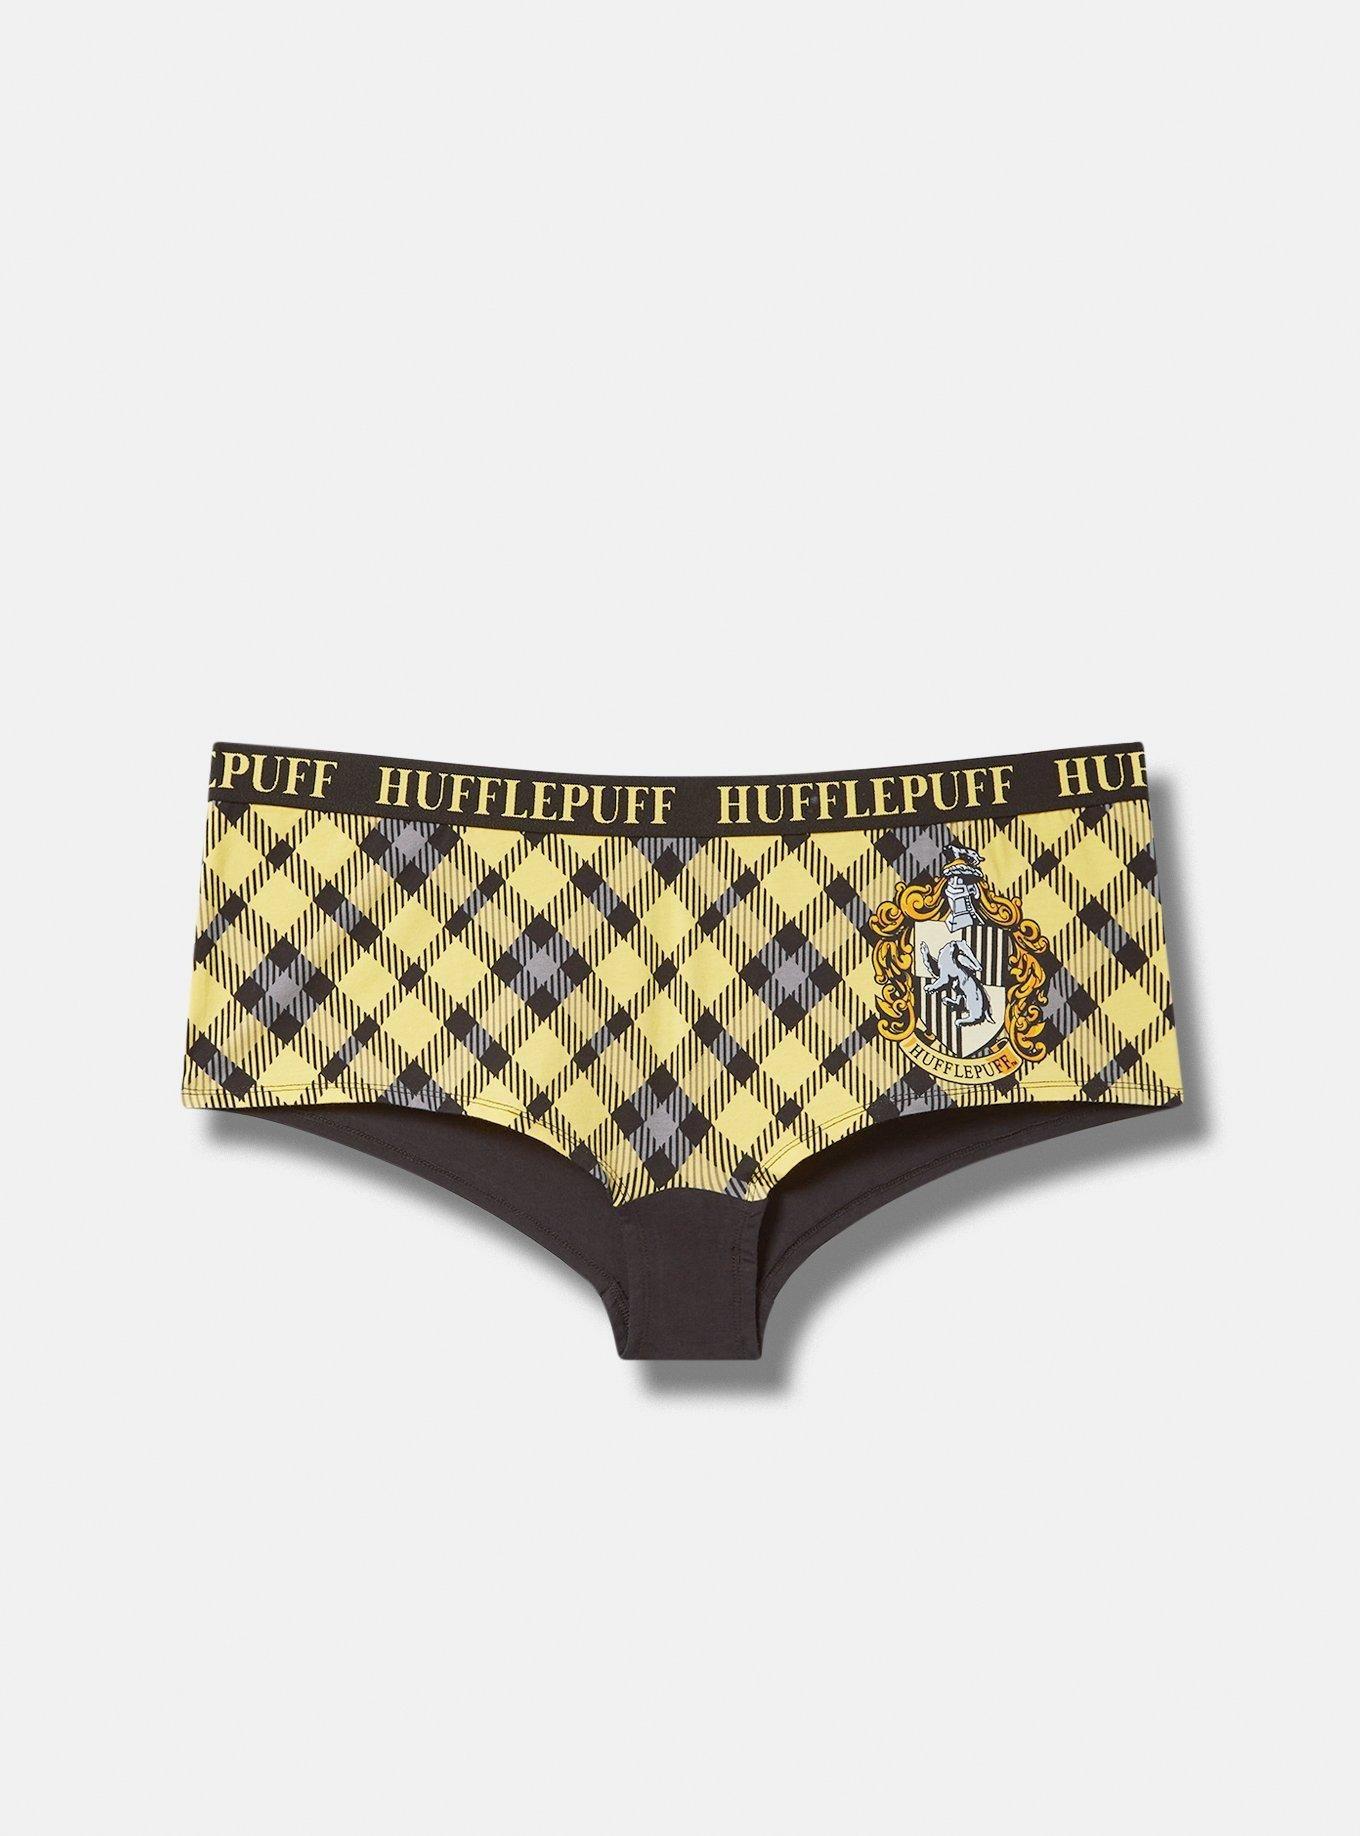 NWT Harry Potter Torrid hipster panties size 3